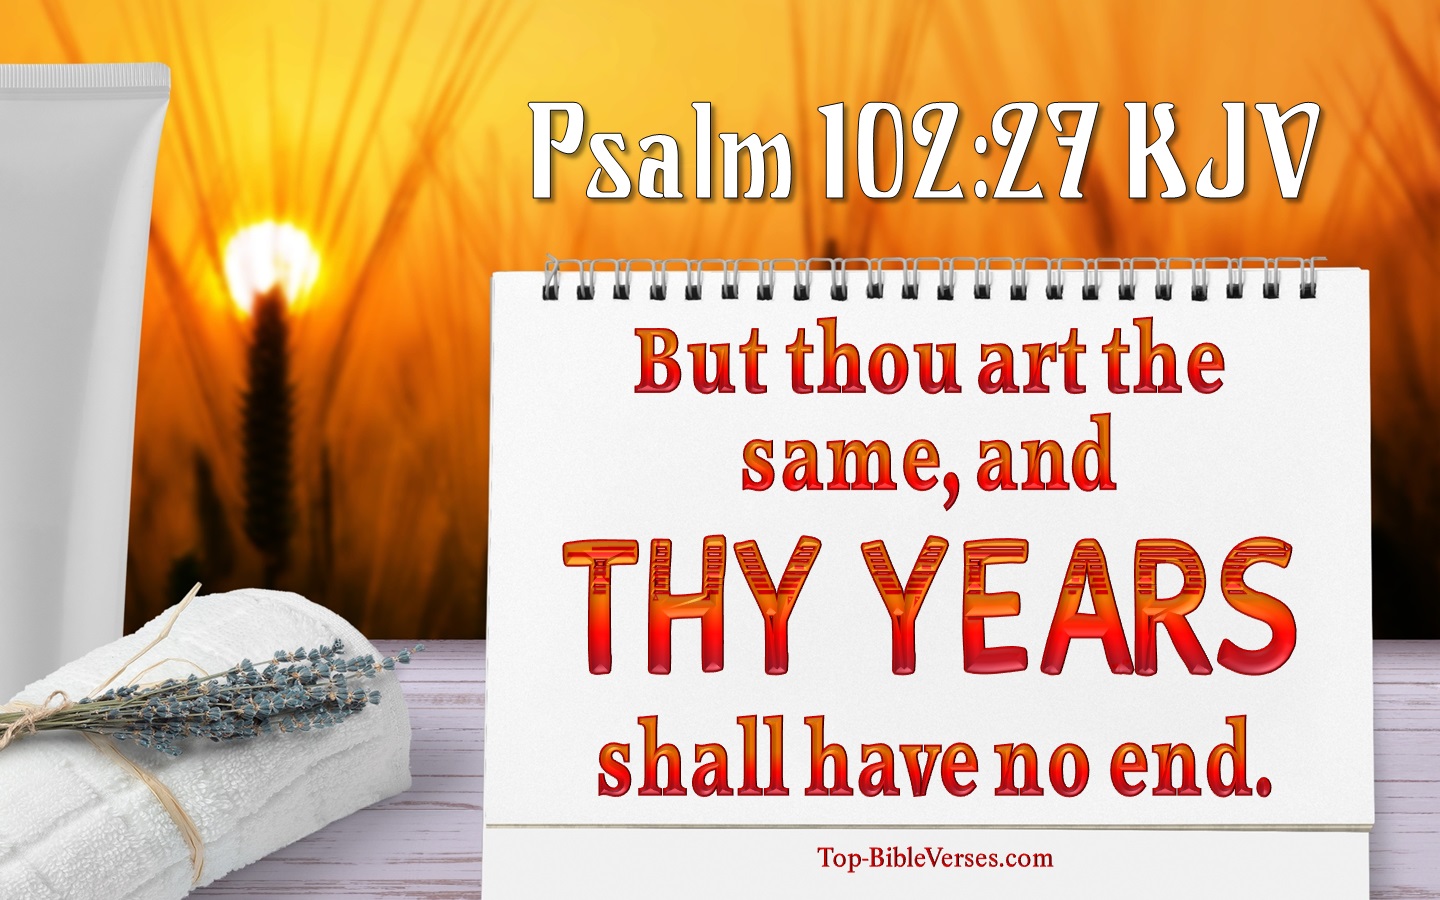 Psalm-102-27-But-thou-art-the-same-and-thy-years-shall-have-no-end.-5.jpg